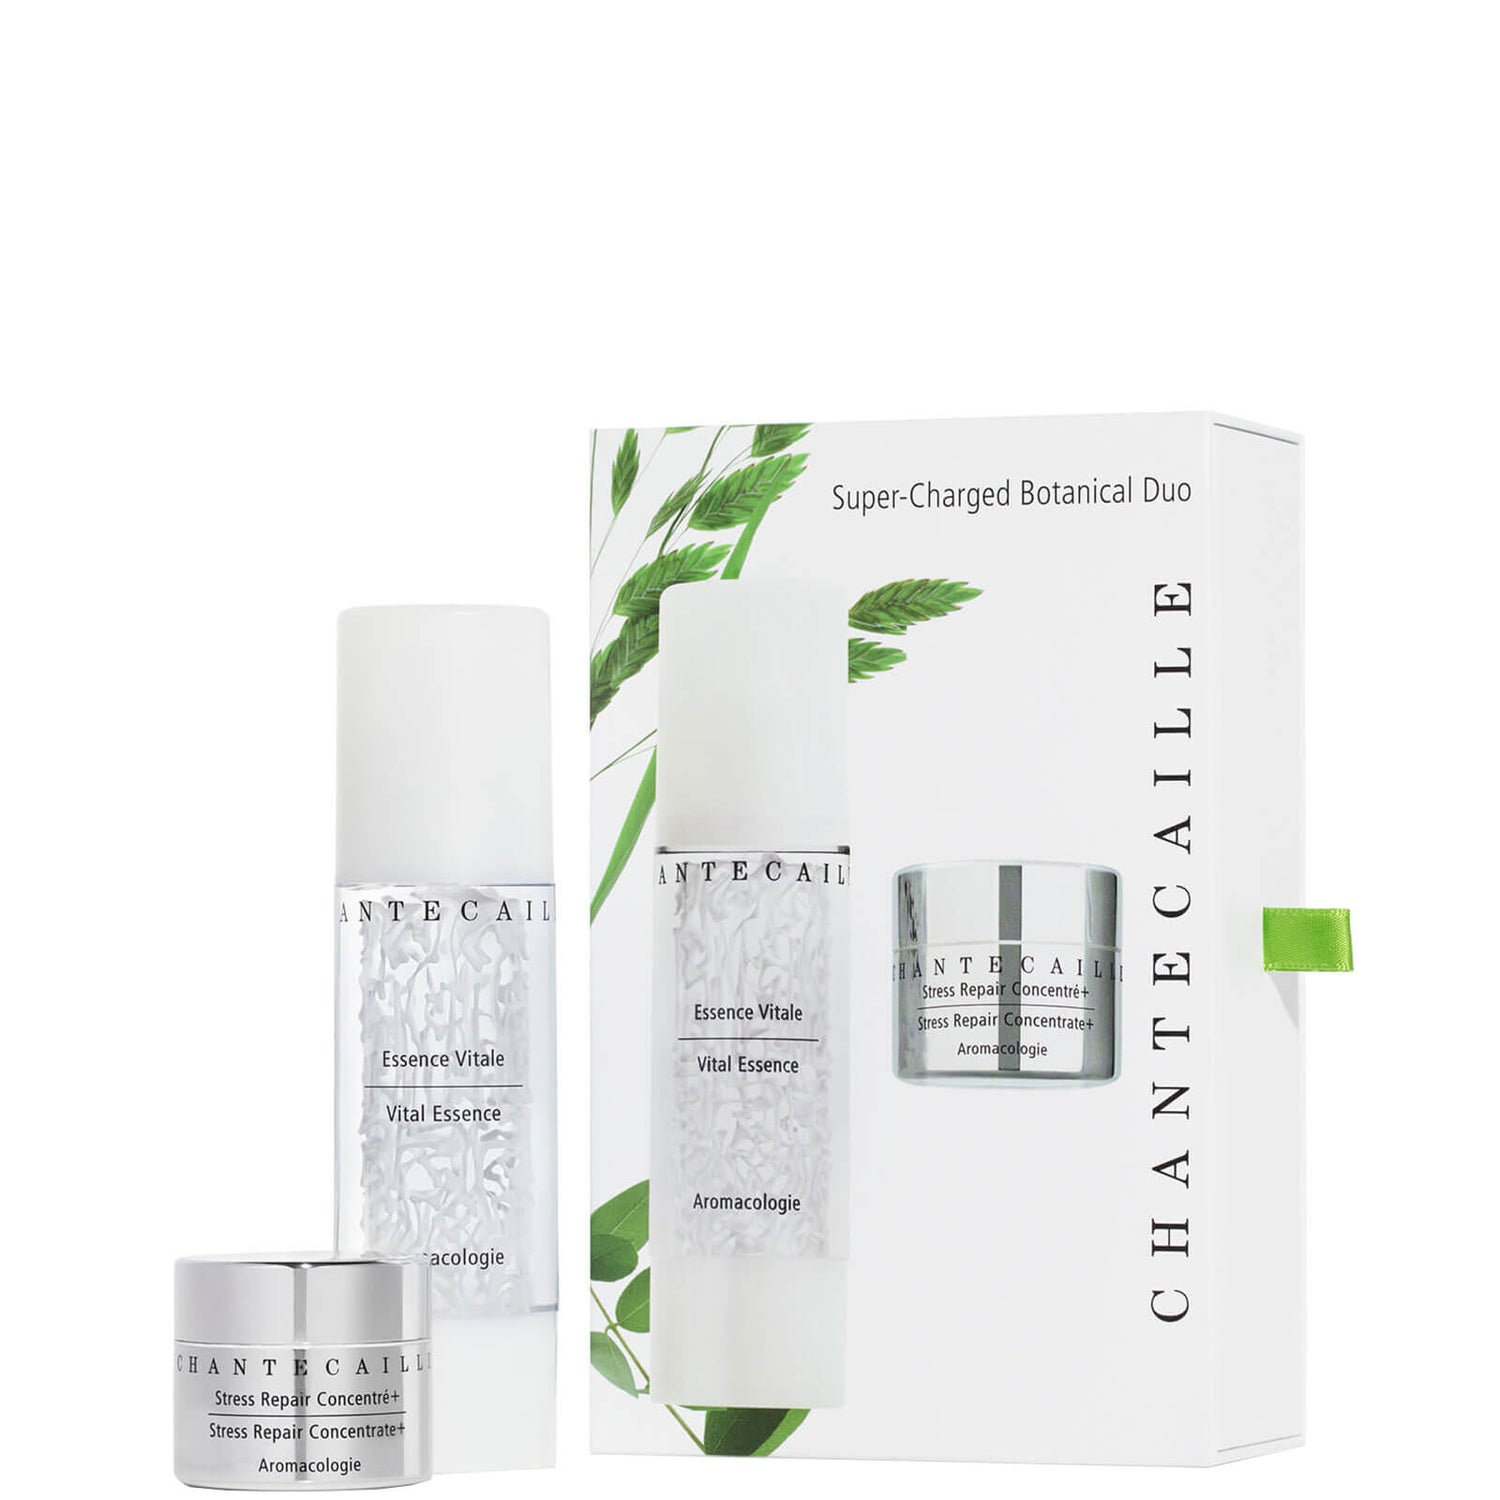 Chantecaille Super Charged Botanical Duo (Worth $313)